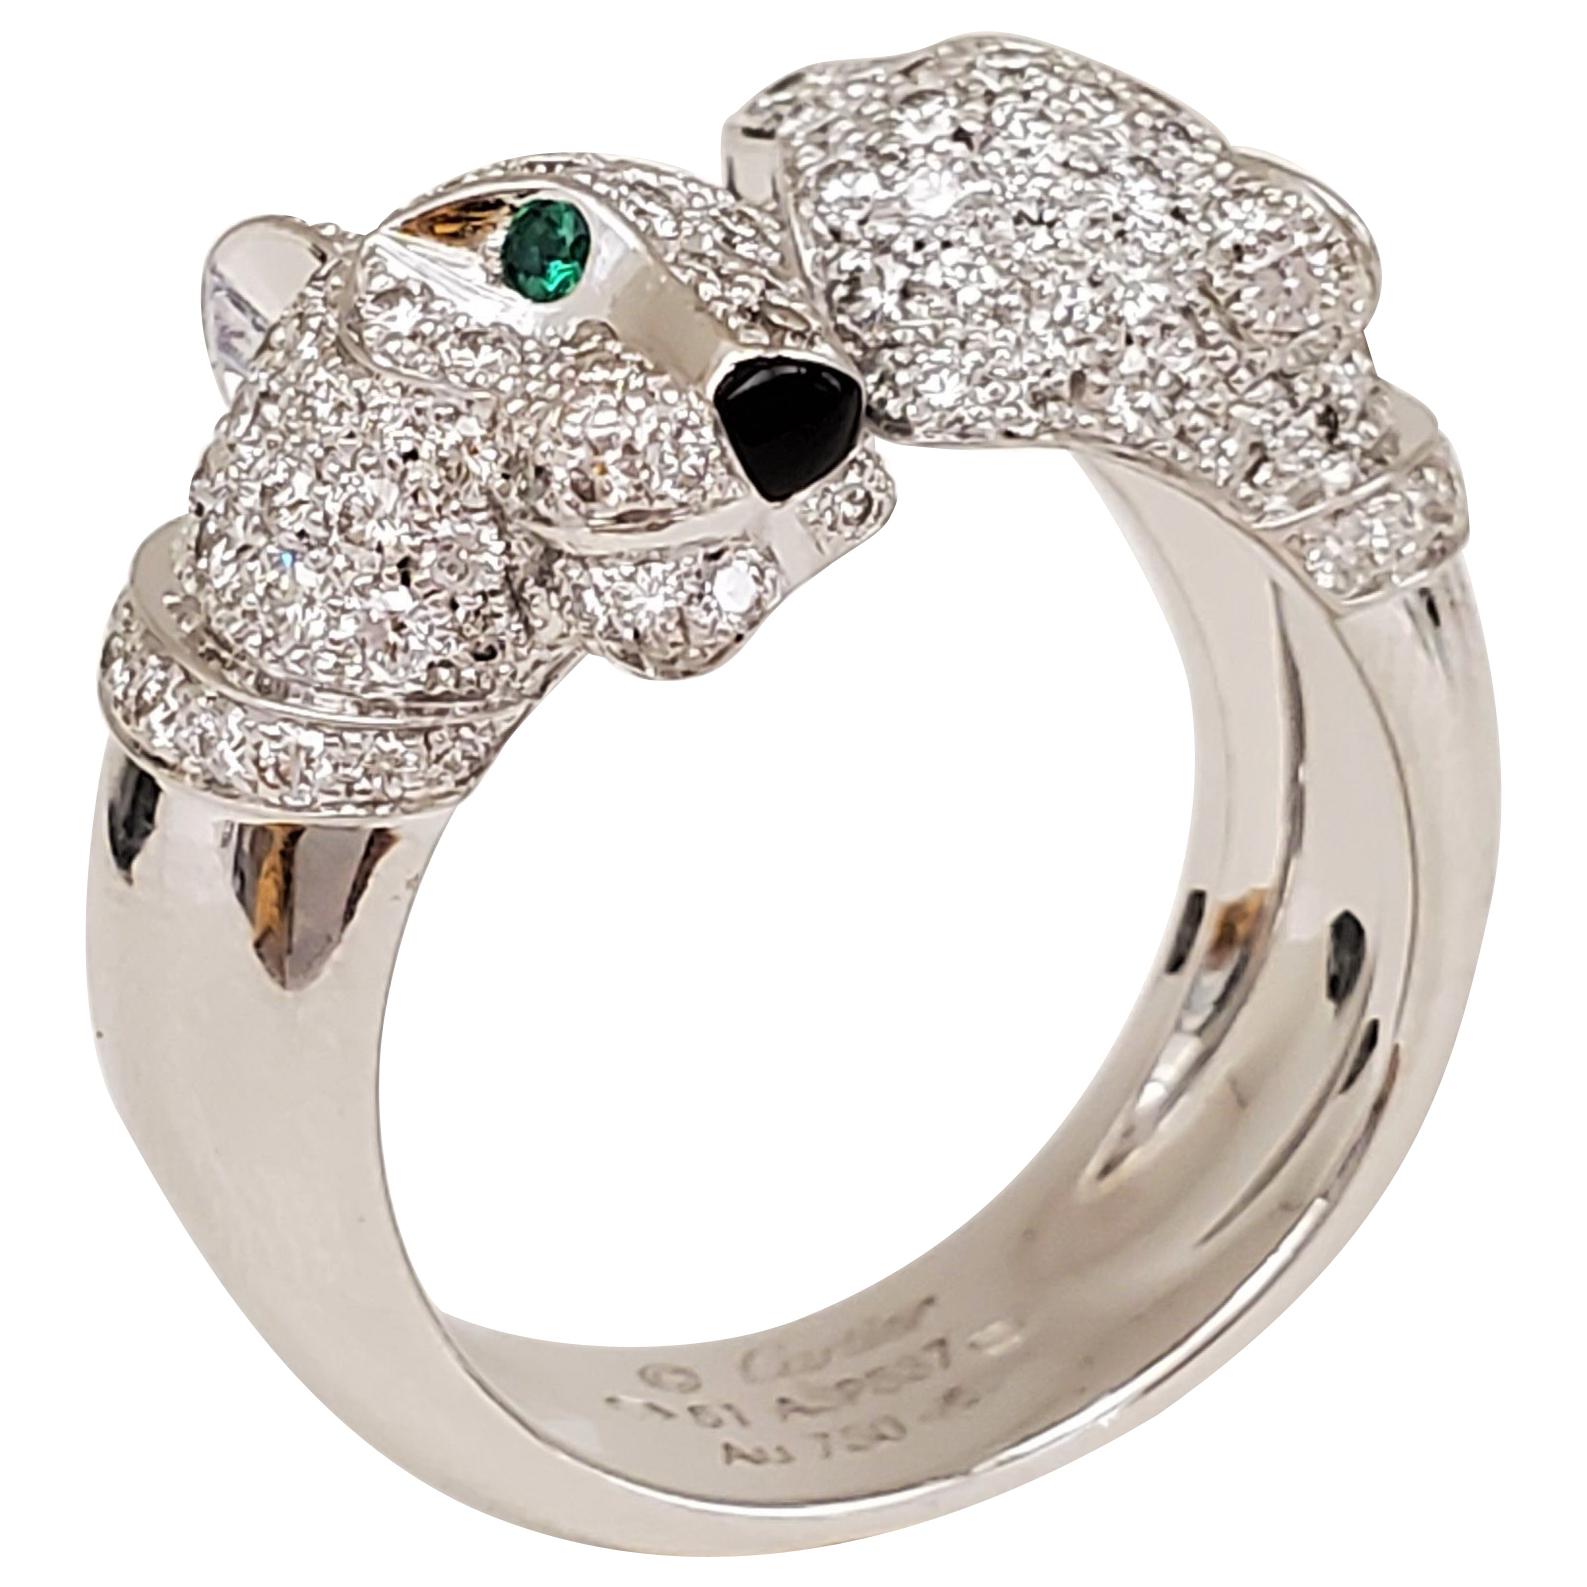 Cartier Double Panthere Gold Diamond and Emerald Ring